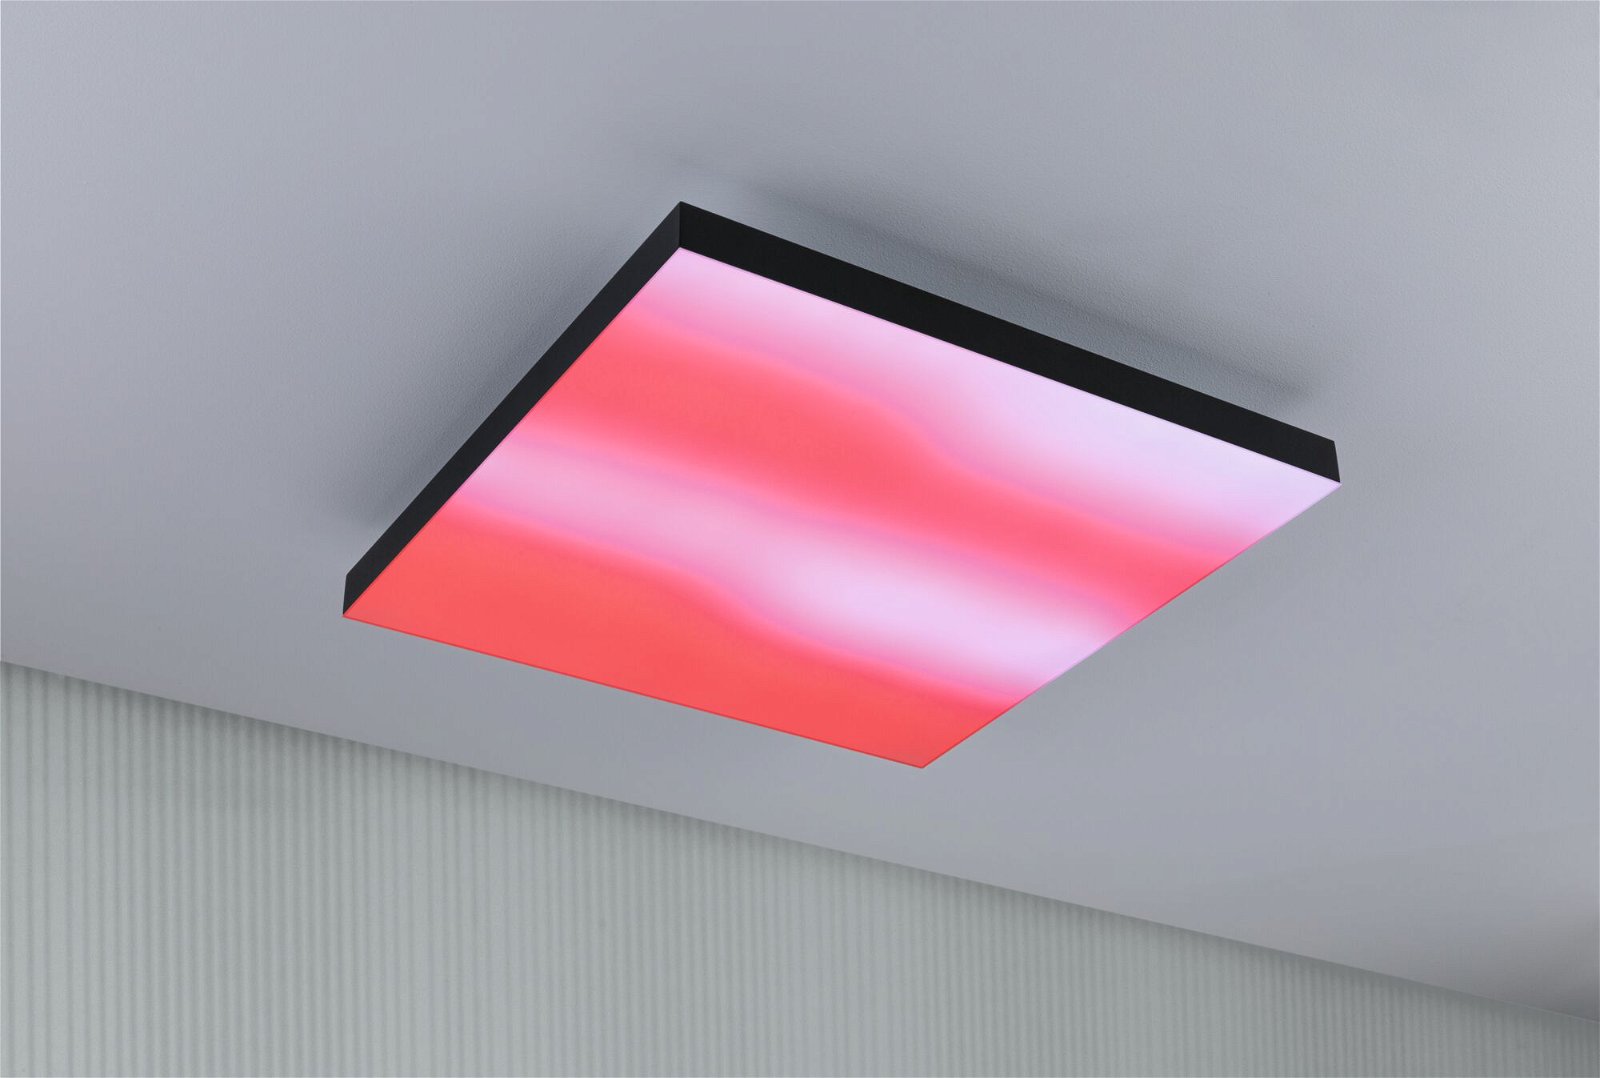 LED Panel Velora Rainbow square 450x450mm RGBW Black dimmable